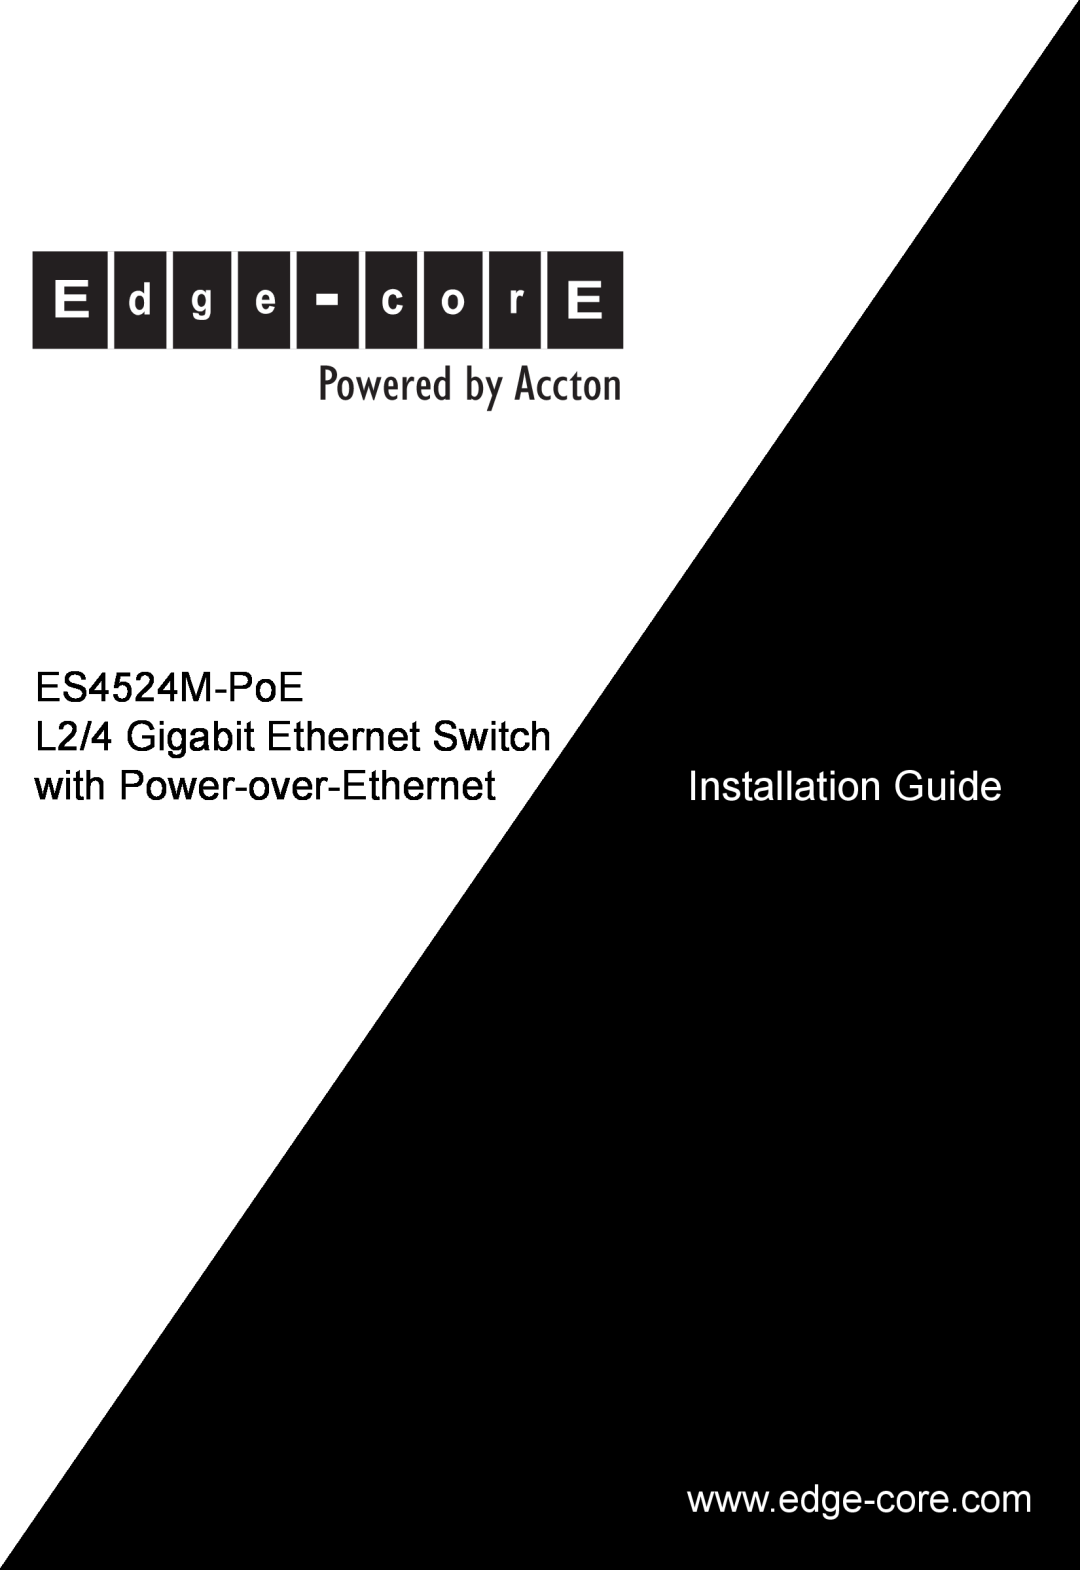 Accton Technology ES4524M-POE manual Powered by Accton, ES4524M-PoE, L2/4 Gigabit Ethernet Switch, Installation Guide 